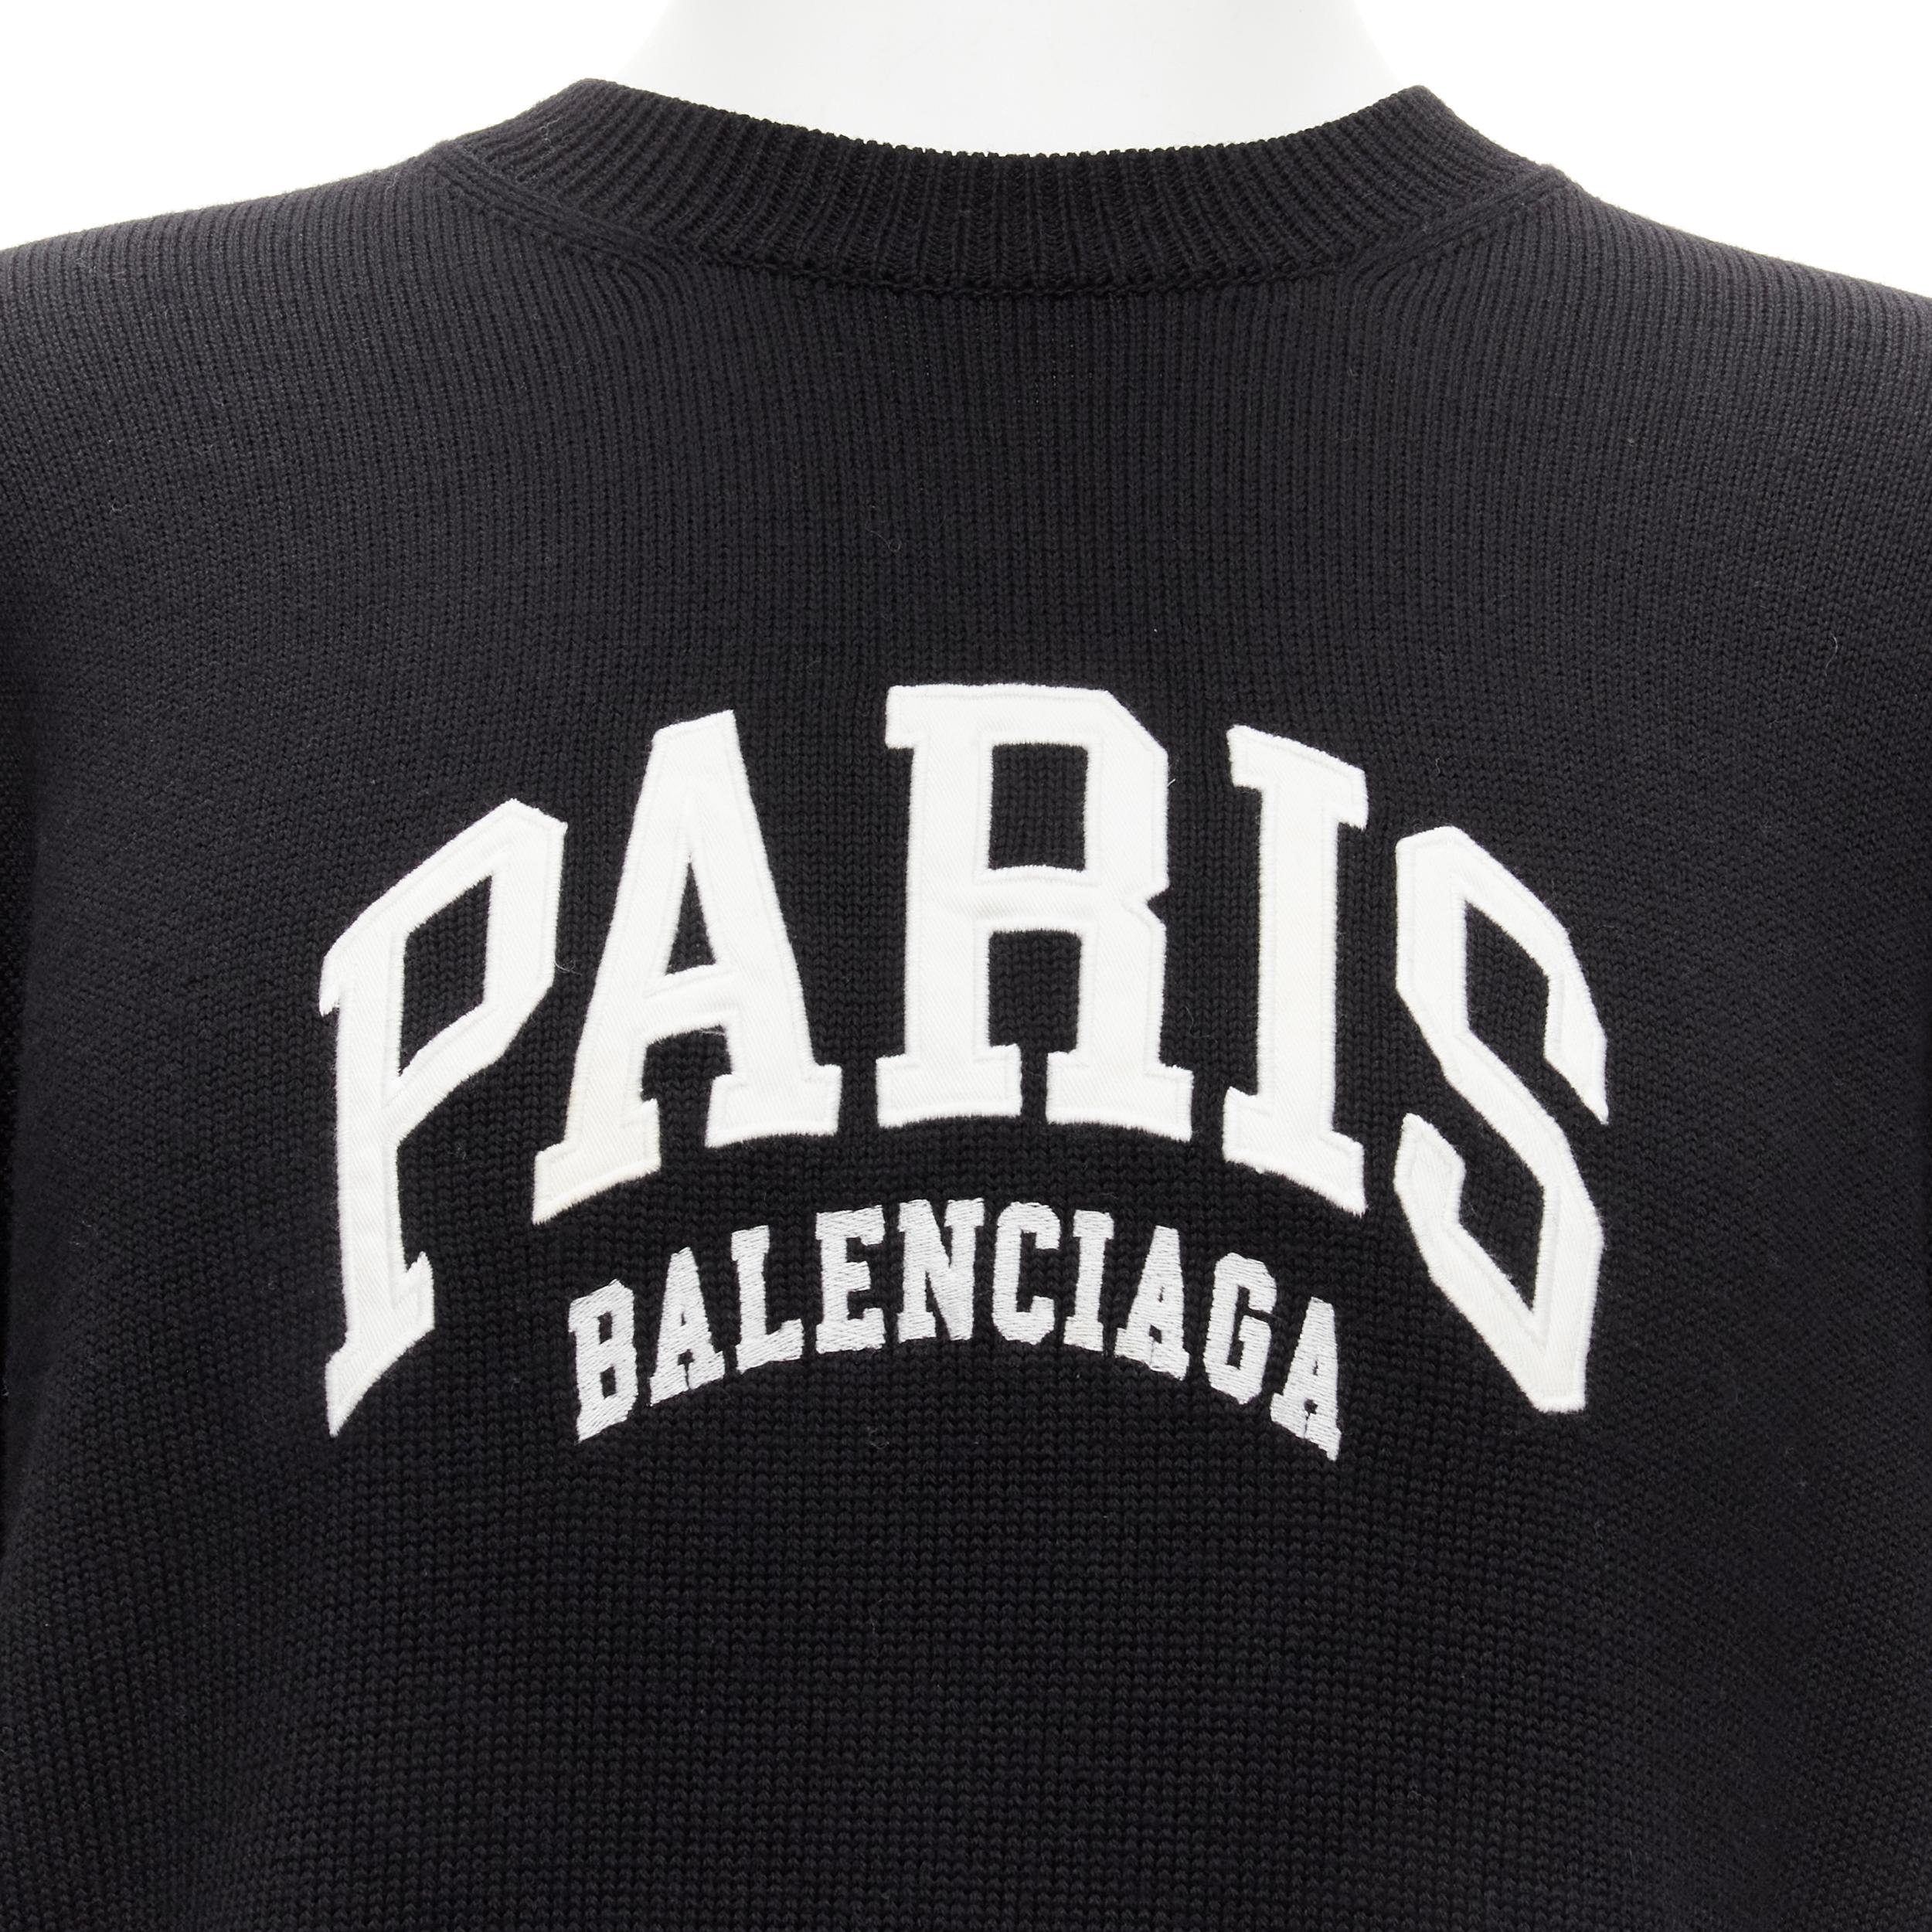 BALENCIAGA Demna 2021 Unisex Wardrobe Paris Cities black virgin wool sweater M
Reference: TGAS/C01939
Brand: Balenciaga
Designer: Demna
Collection: 2021 Cities
Material: Wool
Color: Black, White
Pattern: Solid

CONDITION:
Condition: Excellent, this